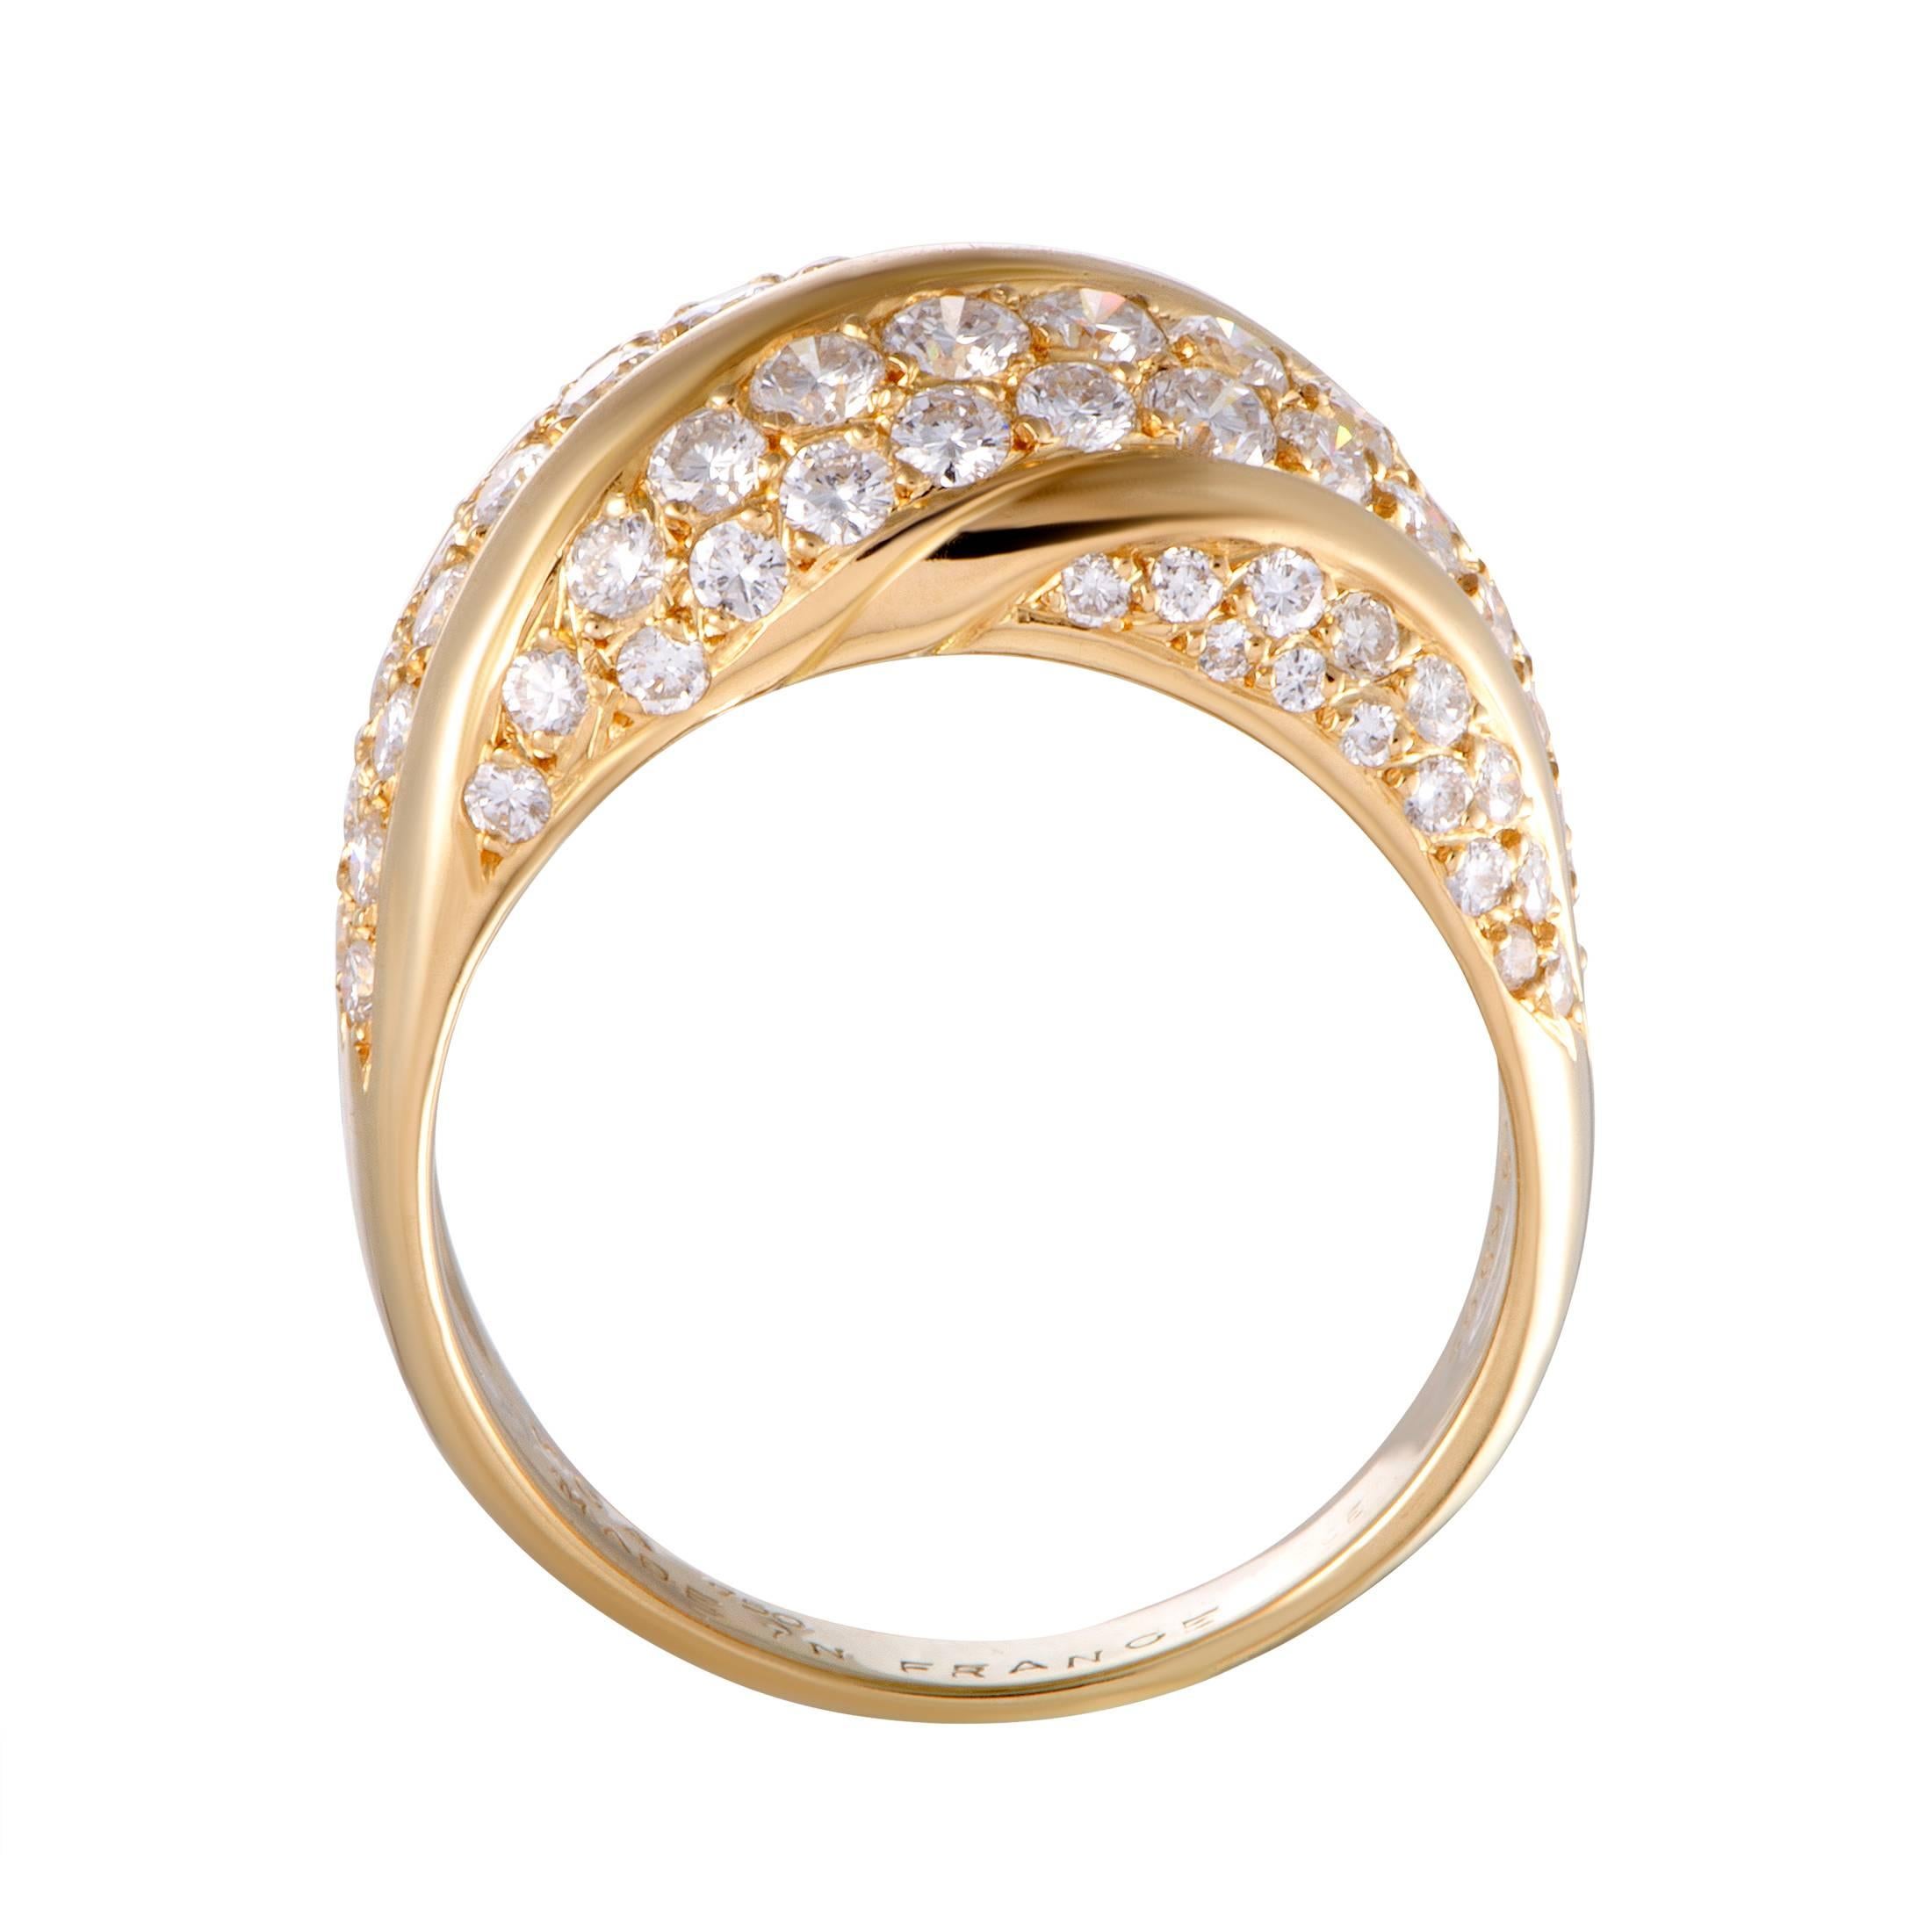 Van Cleef & Arpels achieved a fascinatingly luxurious appearance in this superb ring by combining the radiant 18K yellow gold with the ever-dazzling diamond stones. The ring boasts a total of 1.65 carats of colorless (grade F) diamonds of VVS